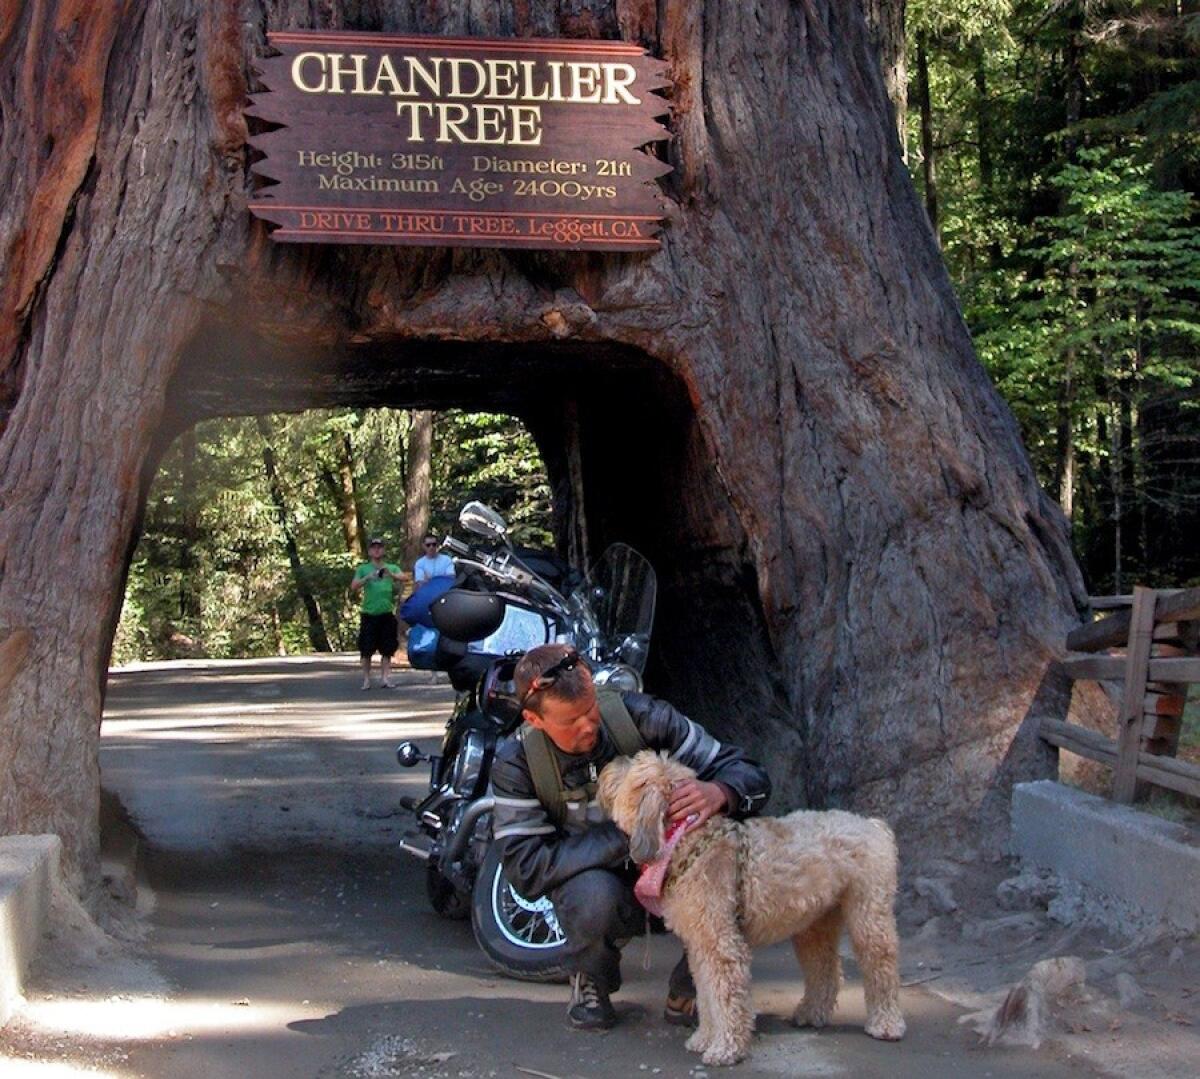 A few years back, Darby compared notes with a motorcyclist from British Columbia after they experienced a drive-through redwood outside Garberville, Calif.